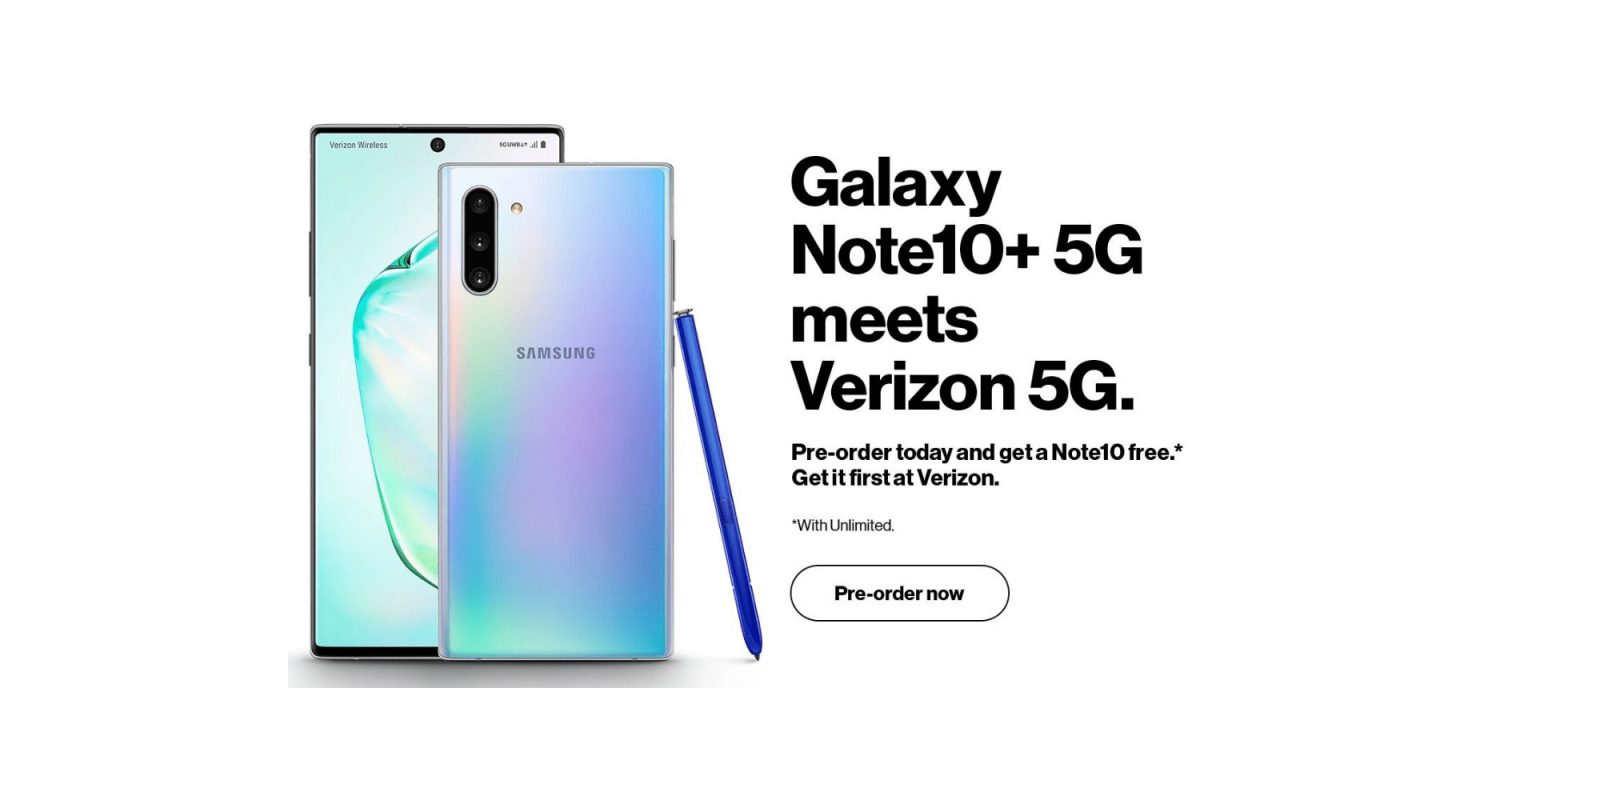 Note 10+ 5G